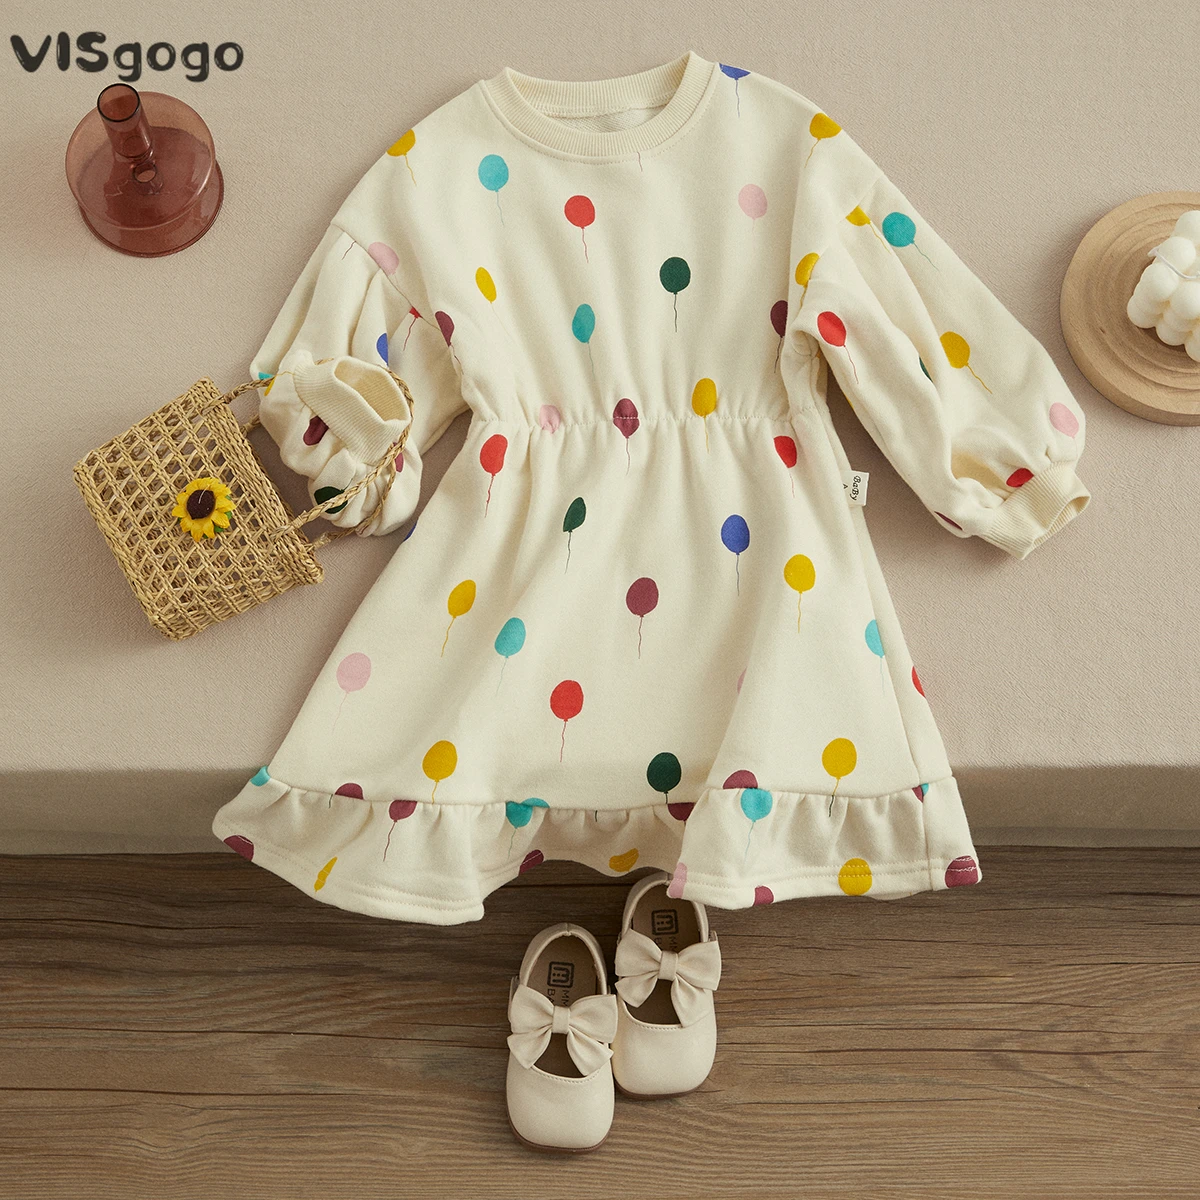 

VISgogo Baby Girls Dress Balloon Print Long Sleeve Round Neck Ruffle A-line Dress Toddler Casual Style Spring Fall Clothing